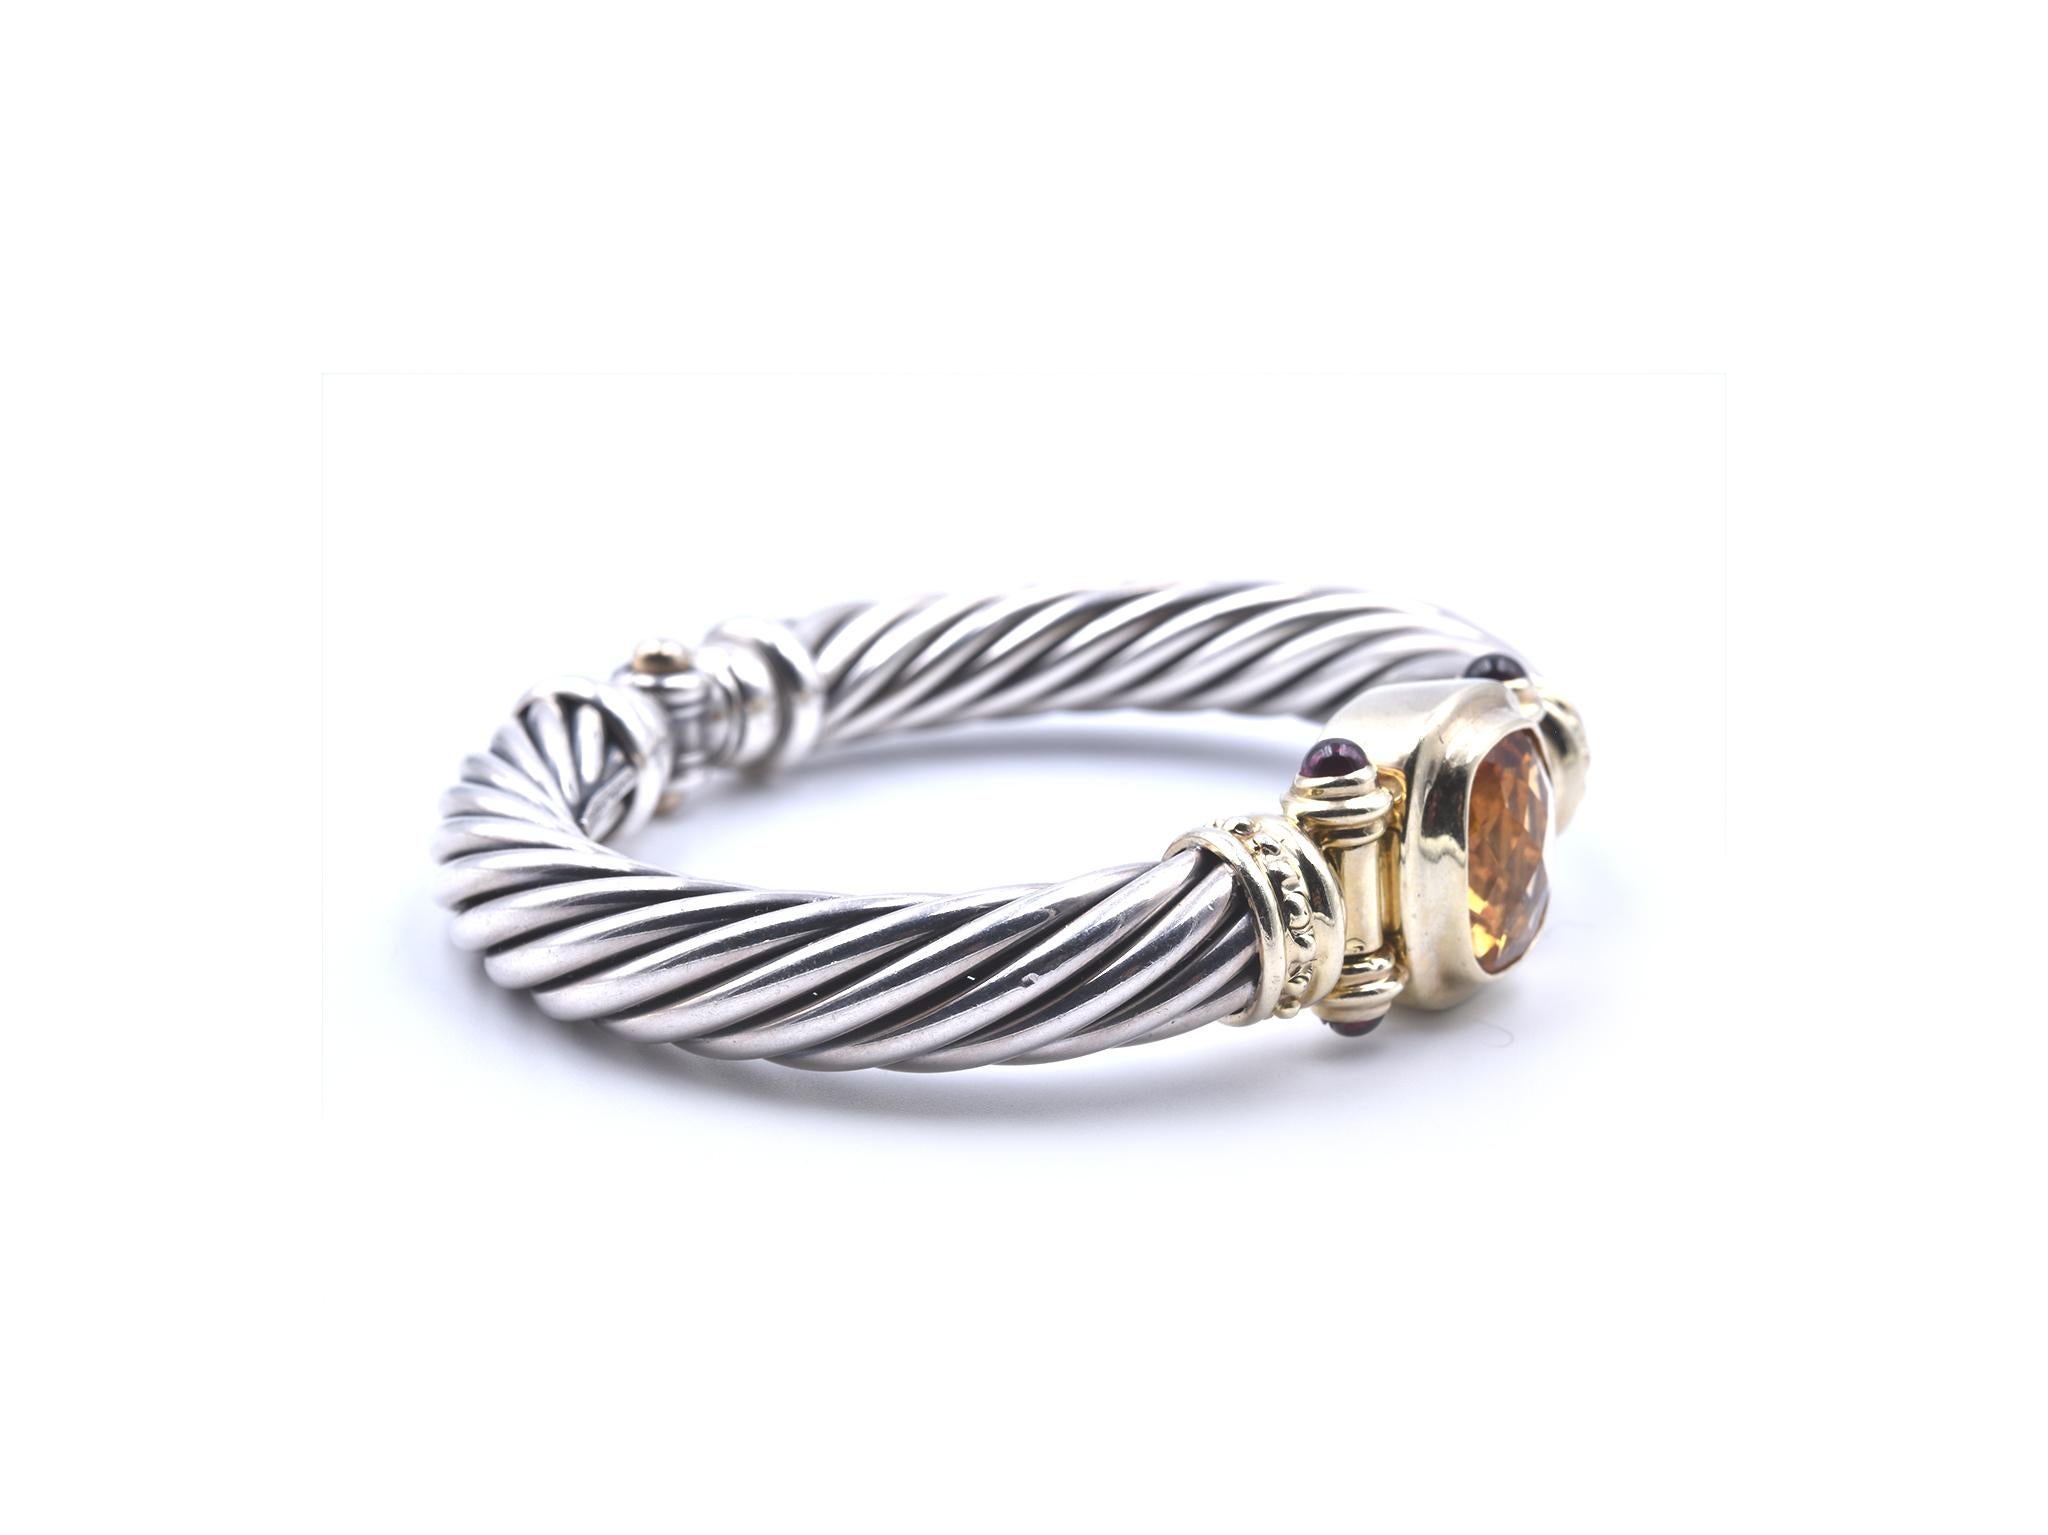 Designer: David Yurman
Material: sterling silver & 14k yellow gold
Dimensions: bracelet is 9.53mm wide and will fit a 6 ½ inch wrist
Weight: 52.31 grams
